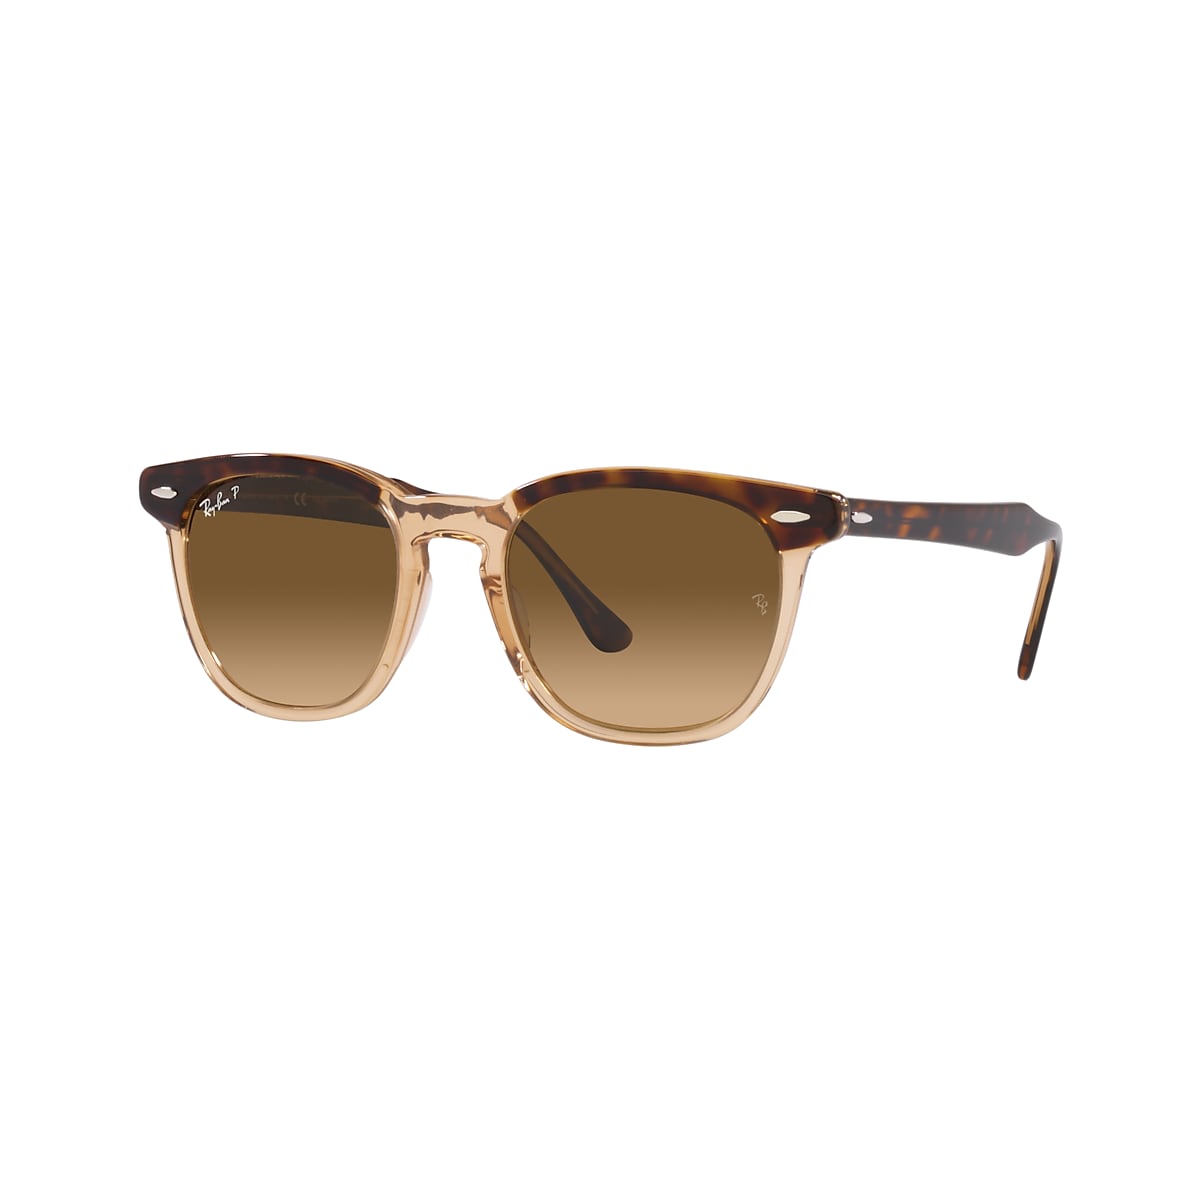 Ray-Ban 0RB2298 Sunglasses in Tortoise | Target Optical